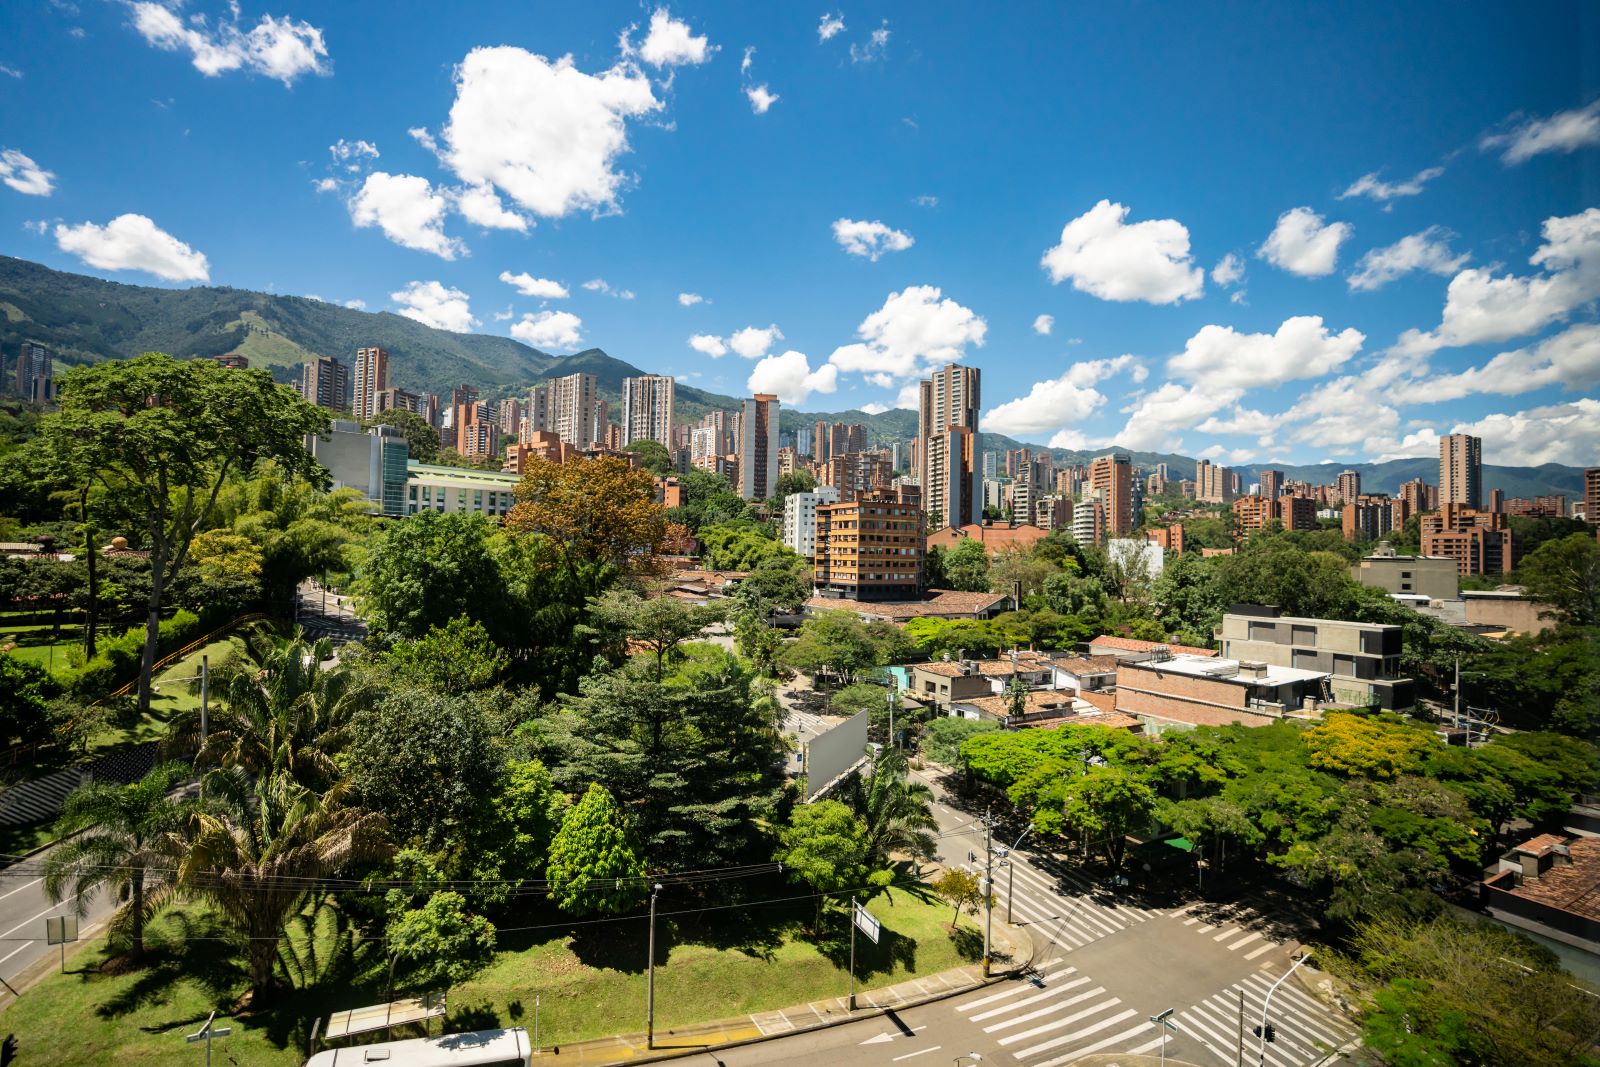 Aerial view of Medellin in Colombia